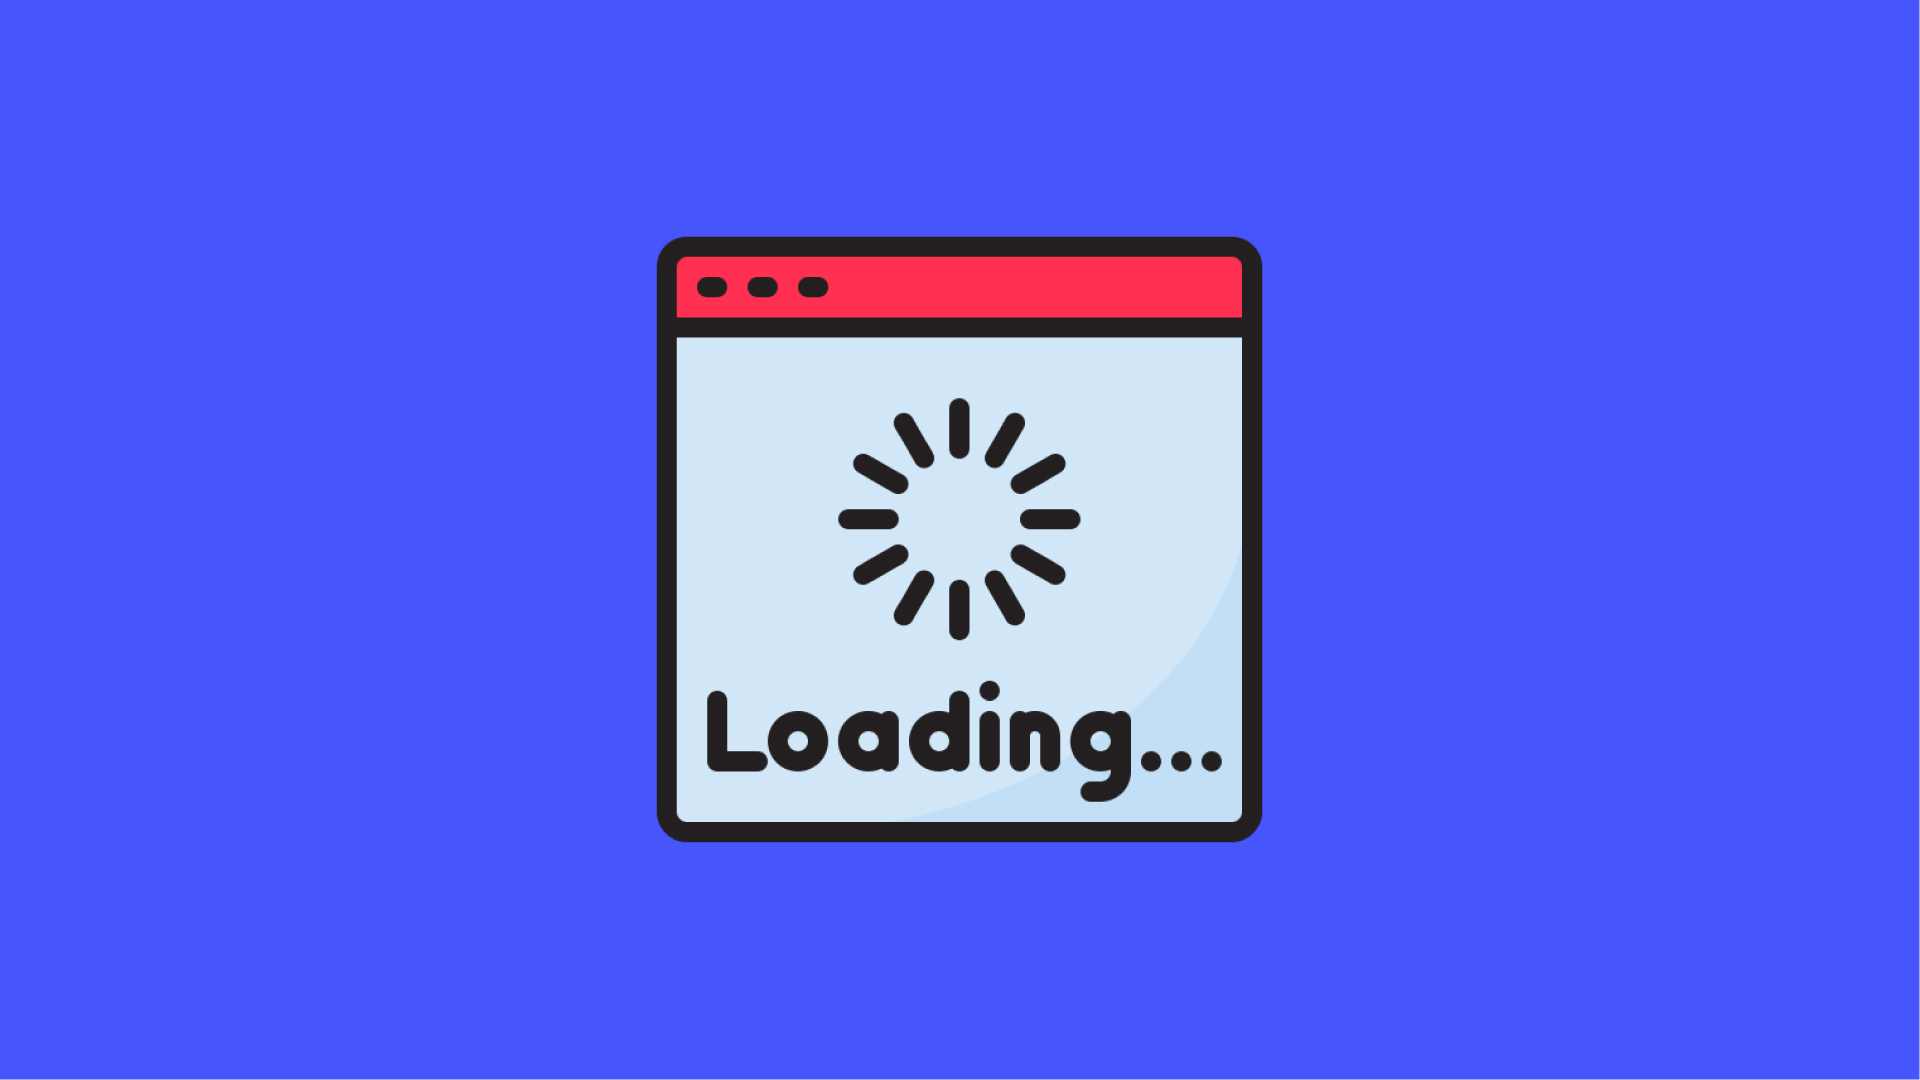 What should publishers do when their AdSense ads are not loading?